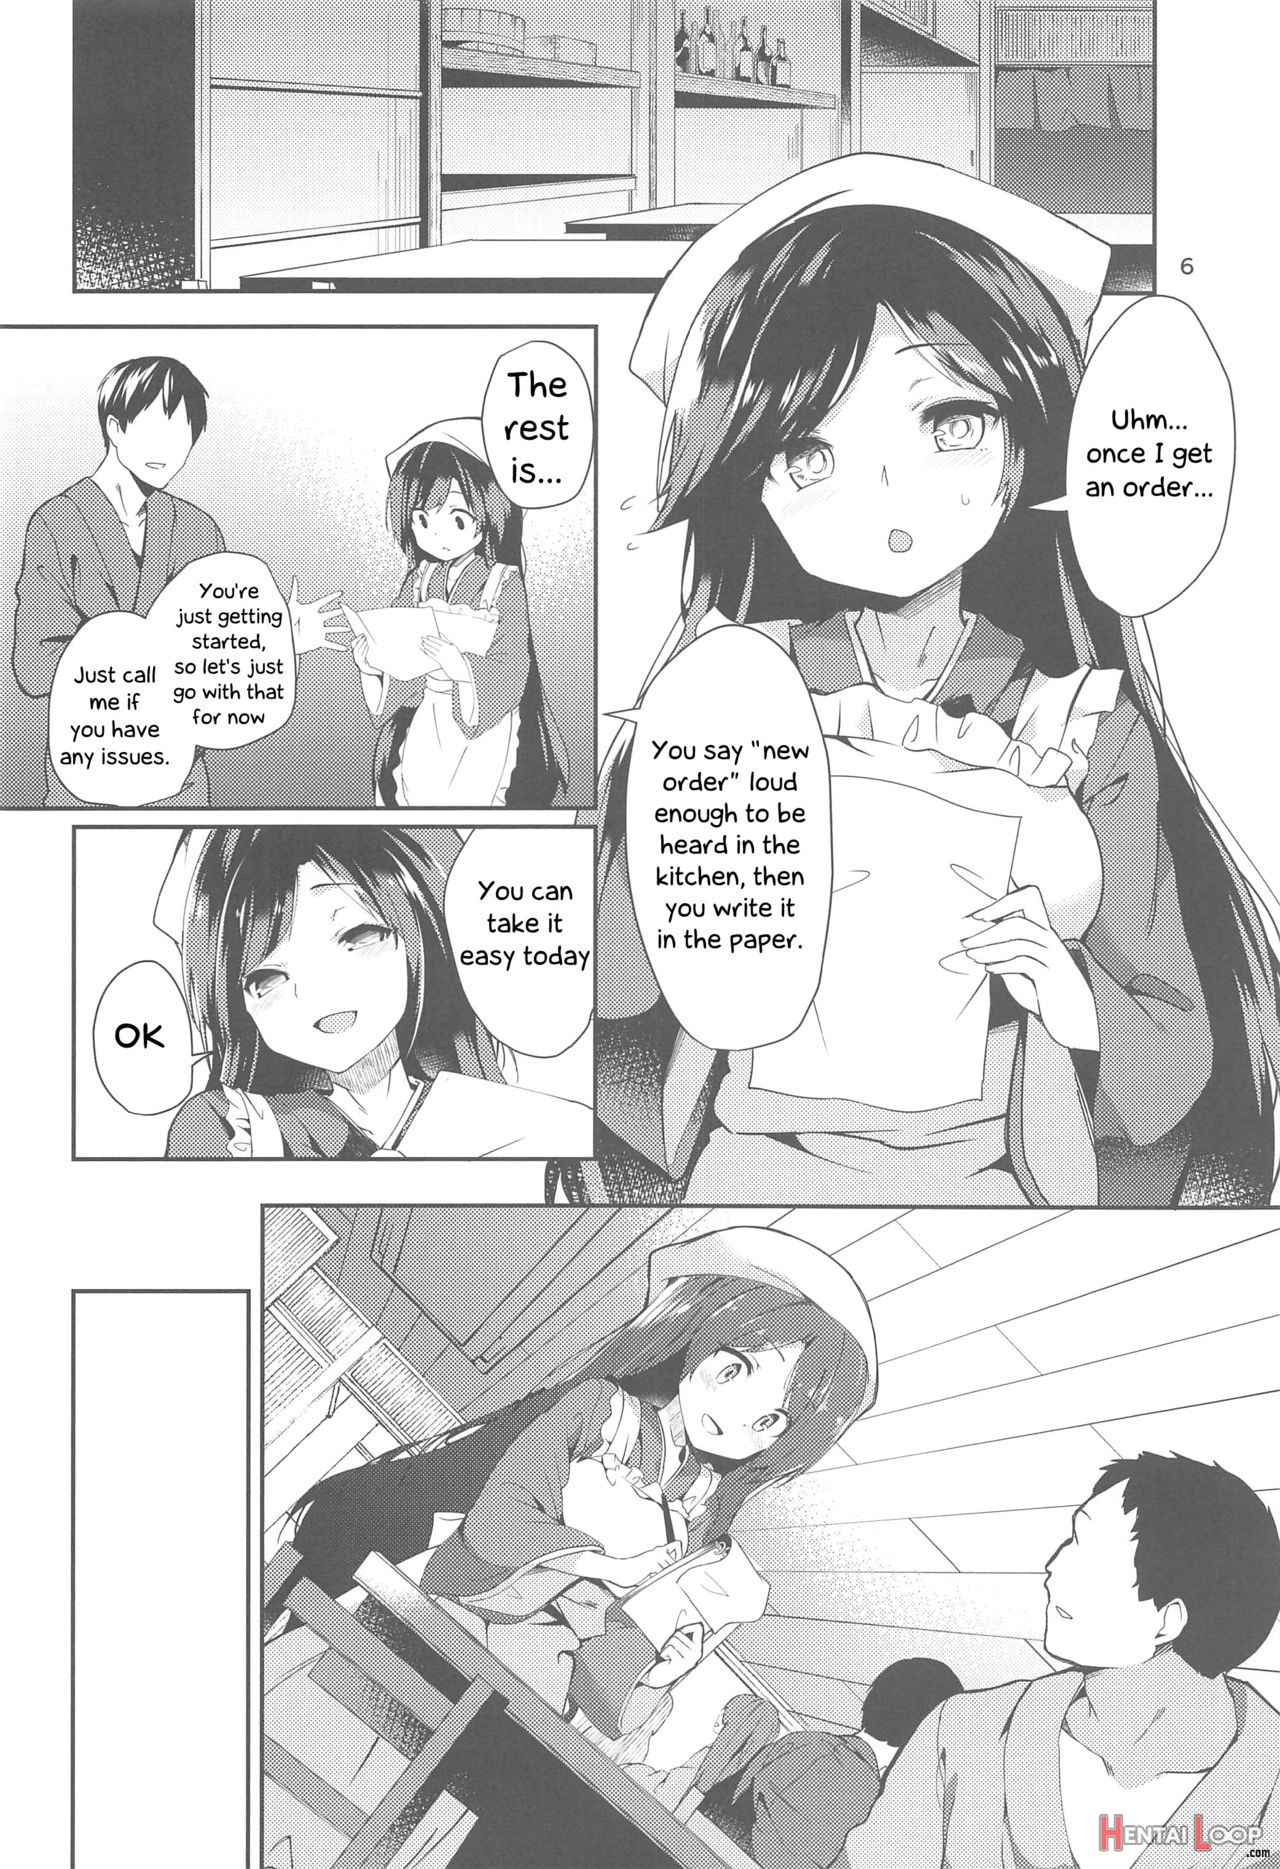 Kagerou's Human Exposure Record page 5